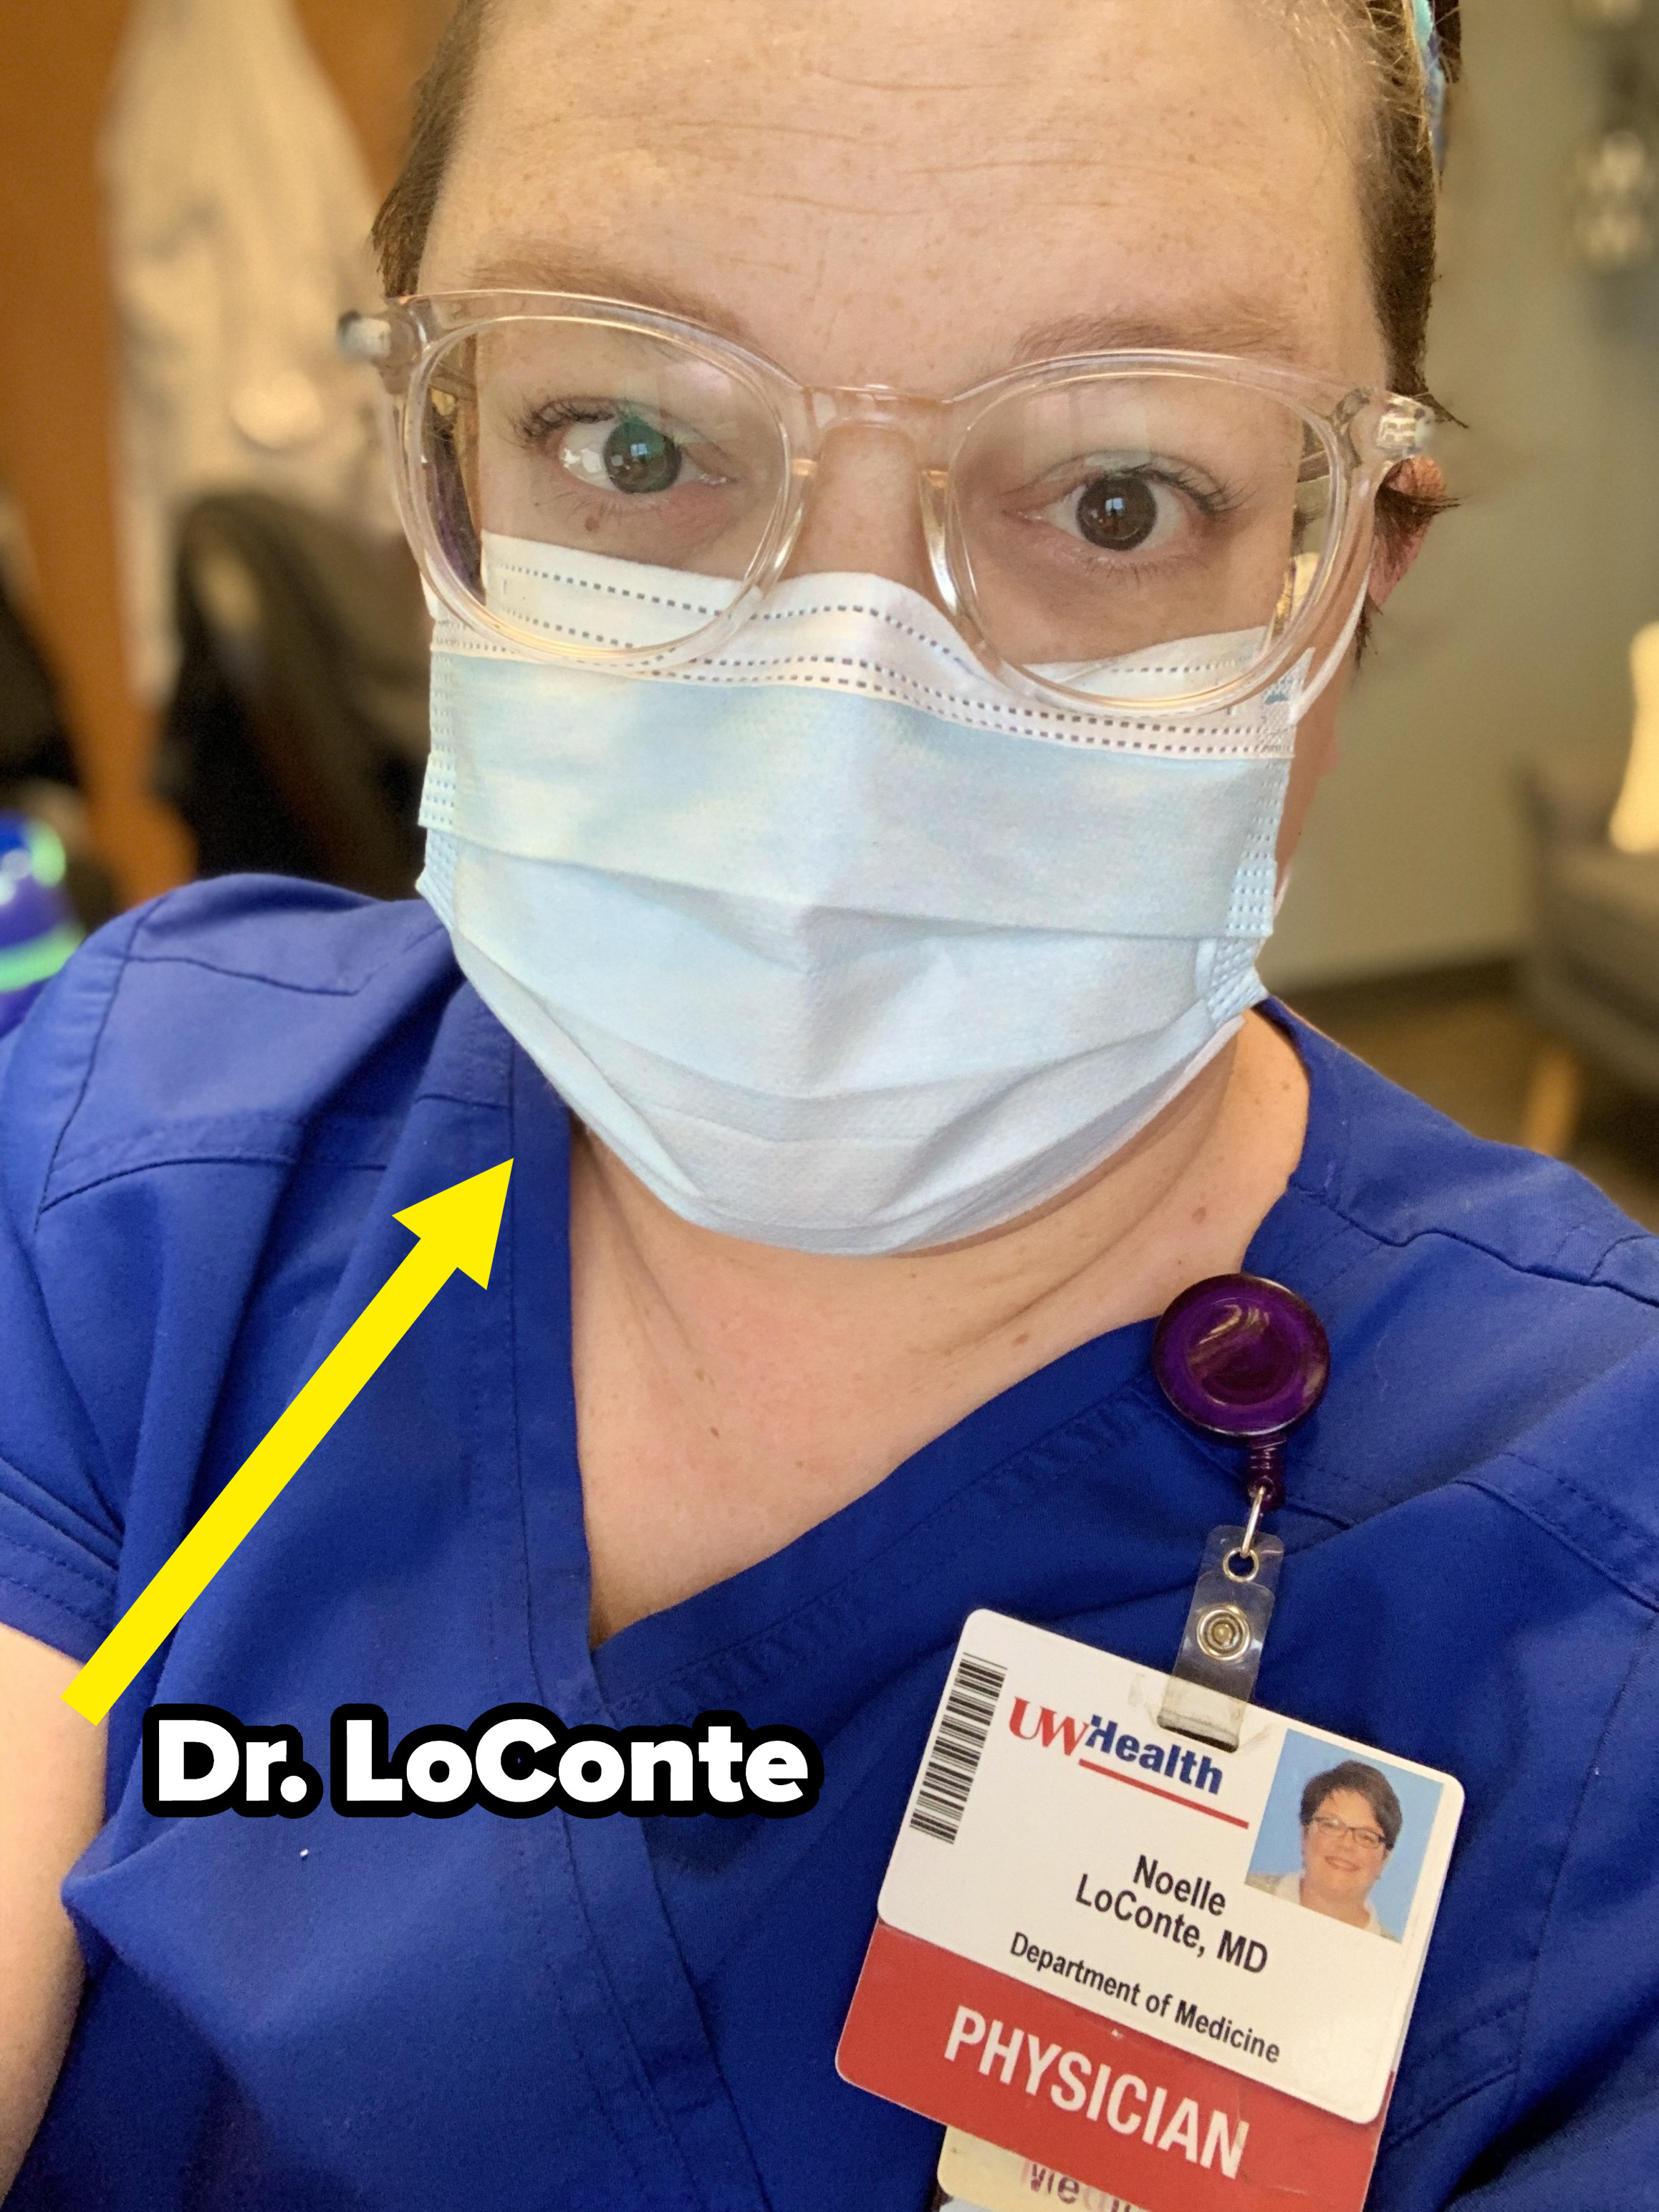 A closeup of Dr. LoConte wearing scrubs and a face mask